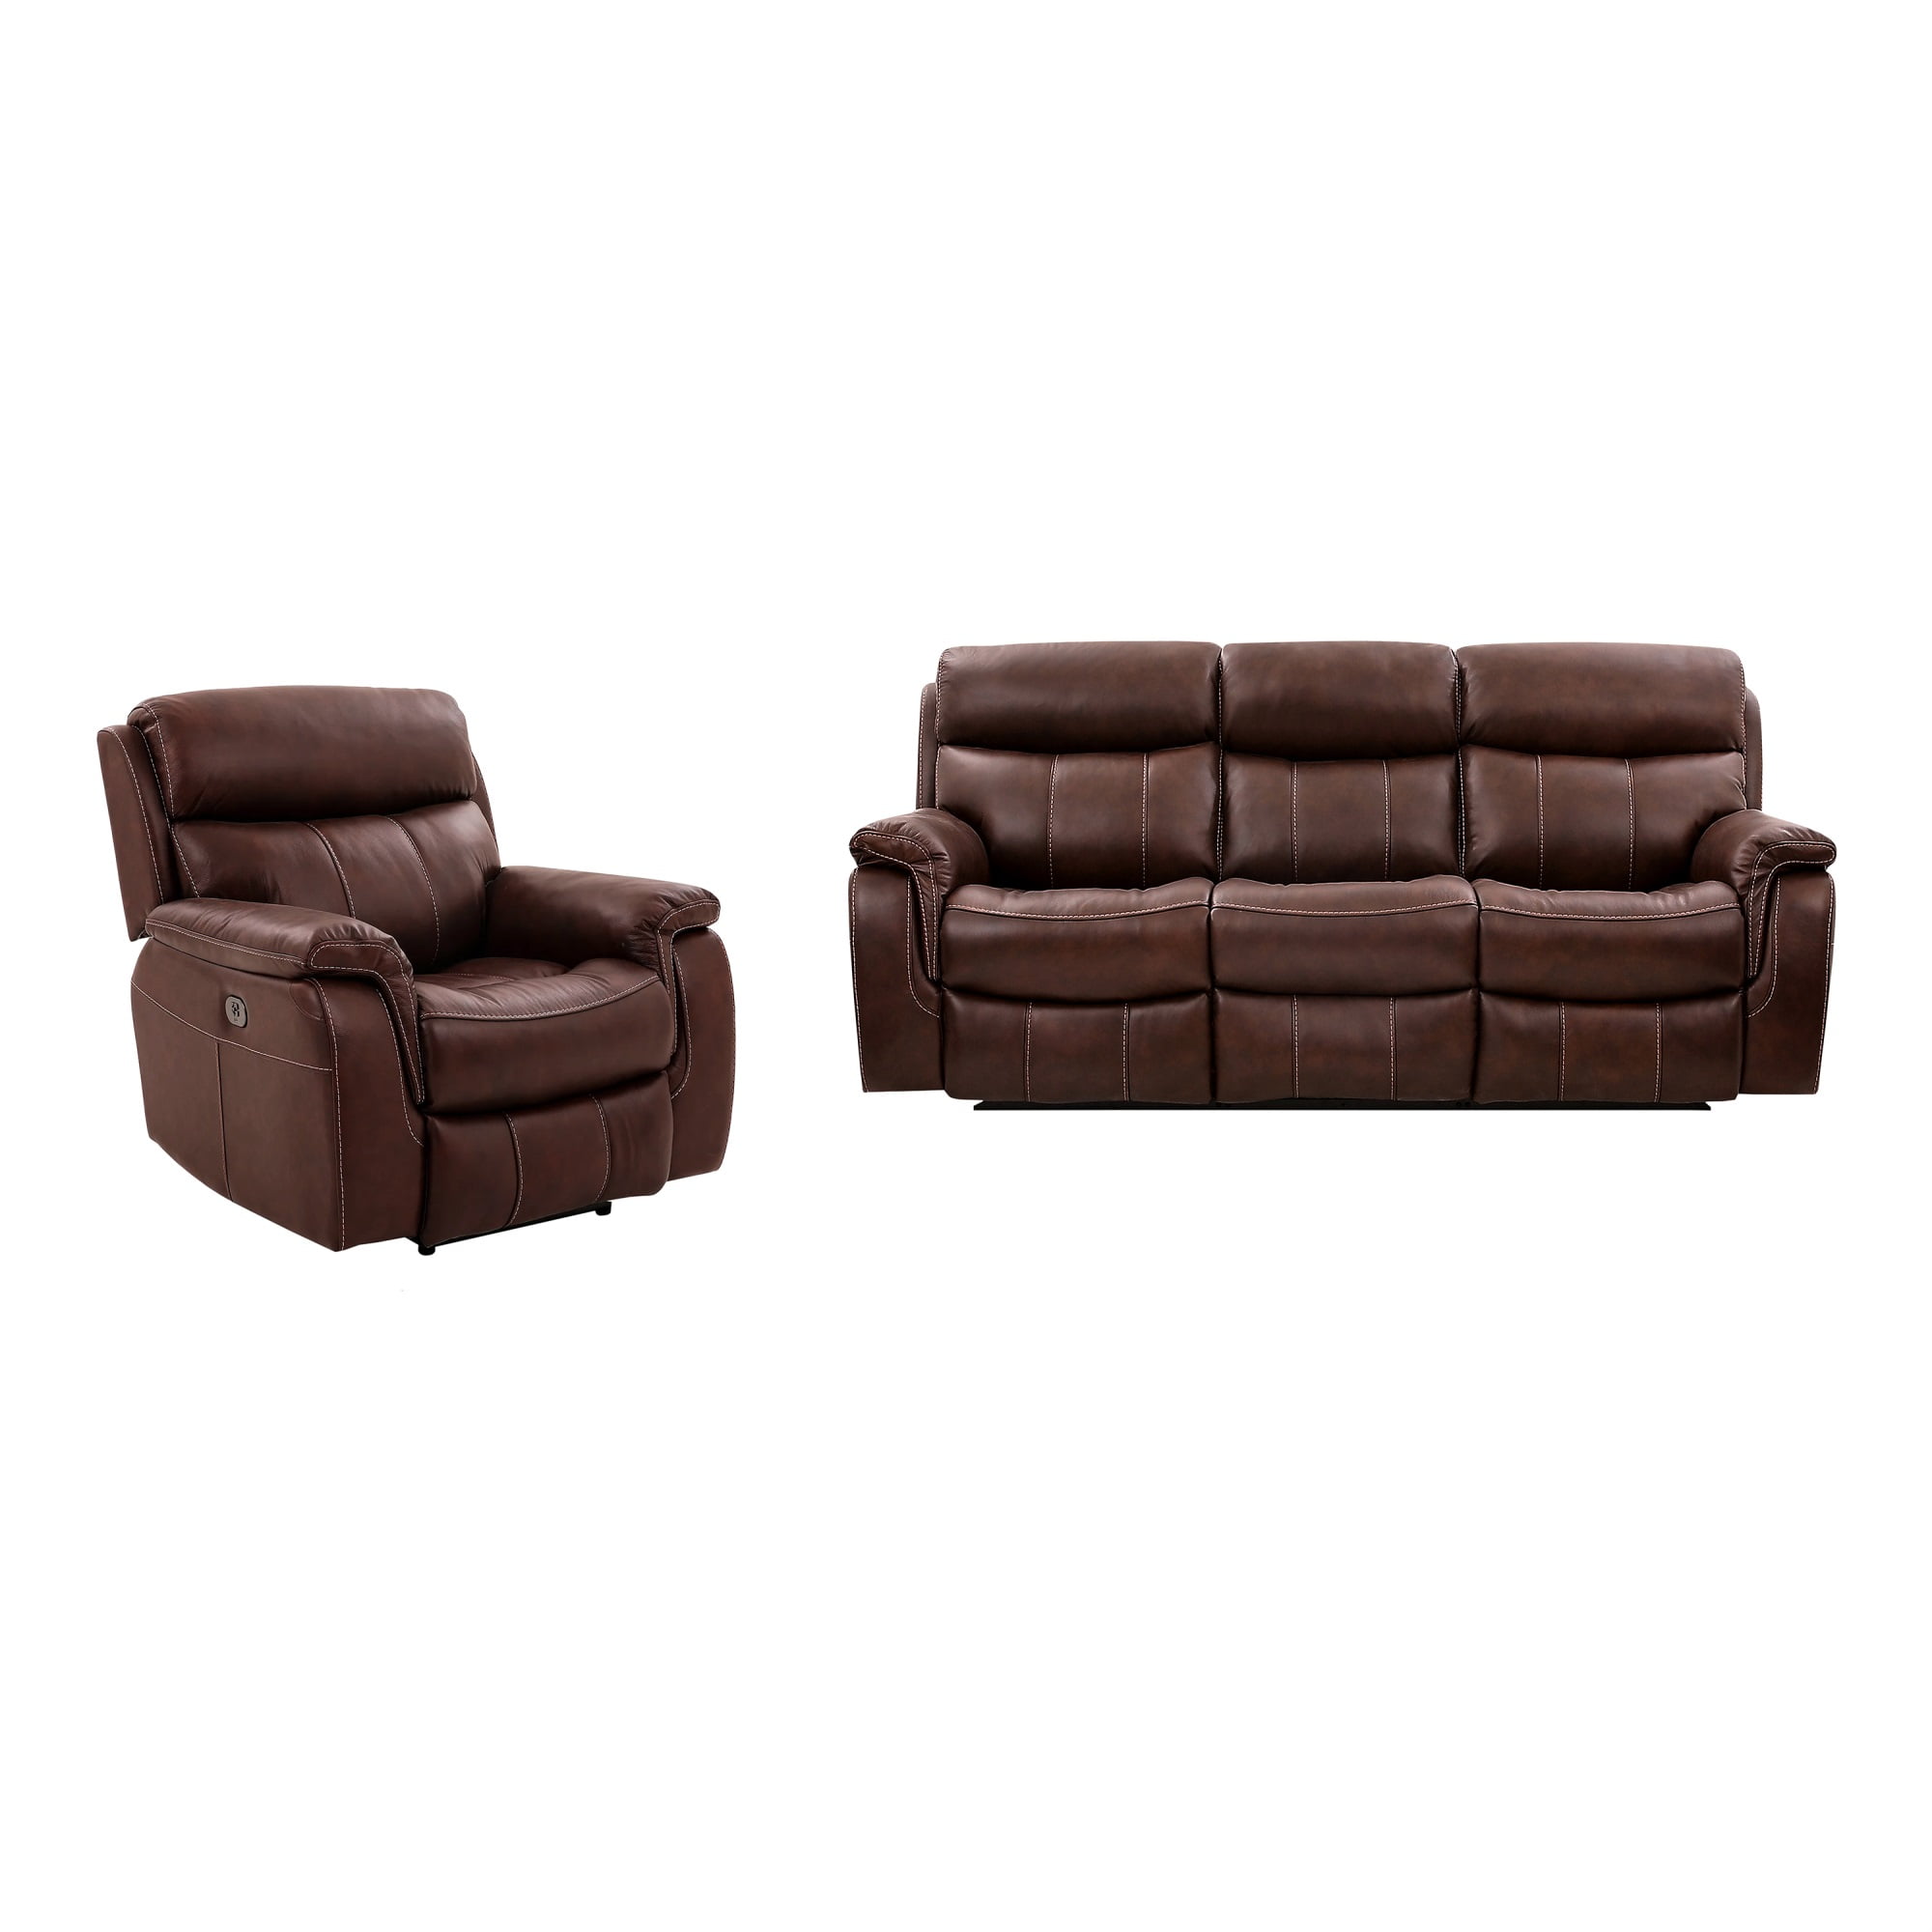 Picture of Armen Living SETMNBR2PC Montague Dual Power Reclining Sofa & Recliner Set in Genuine Brown Leather - 2 Piece